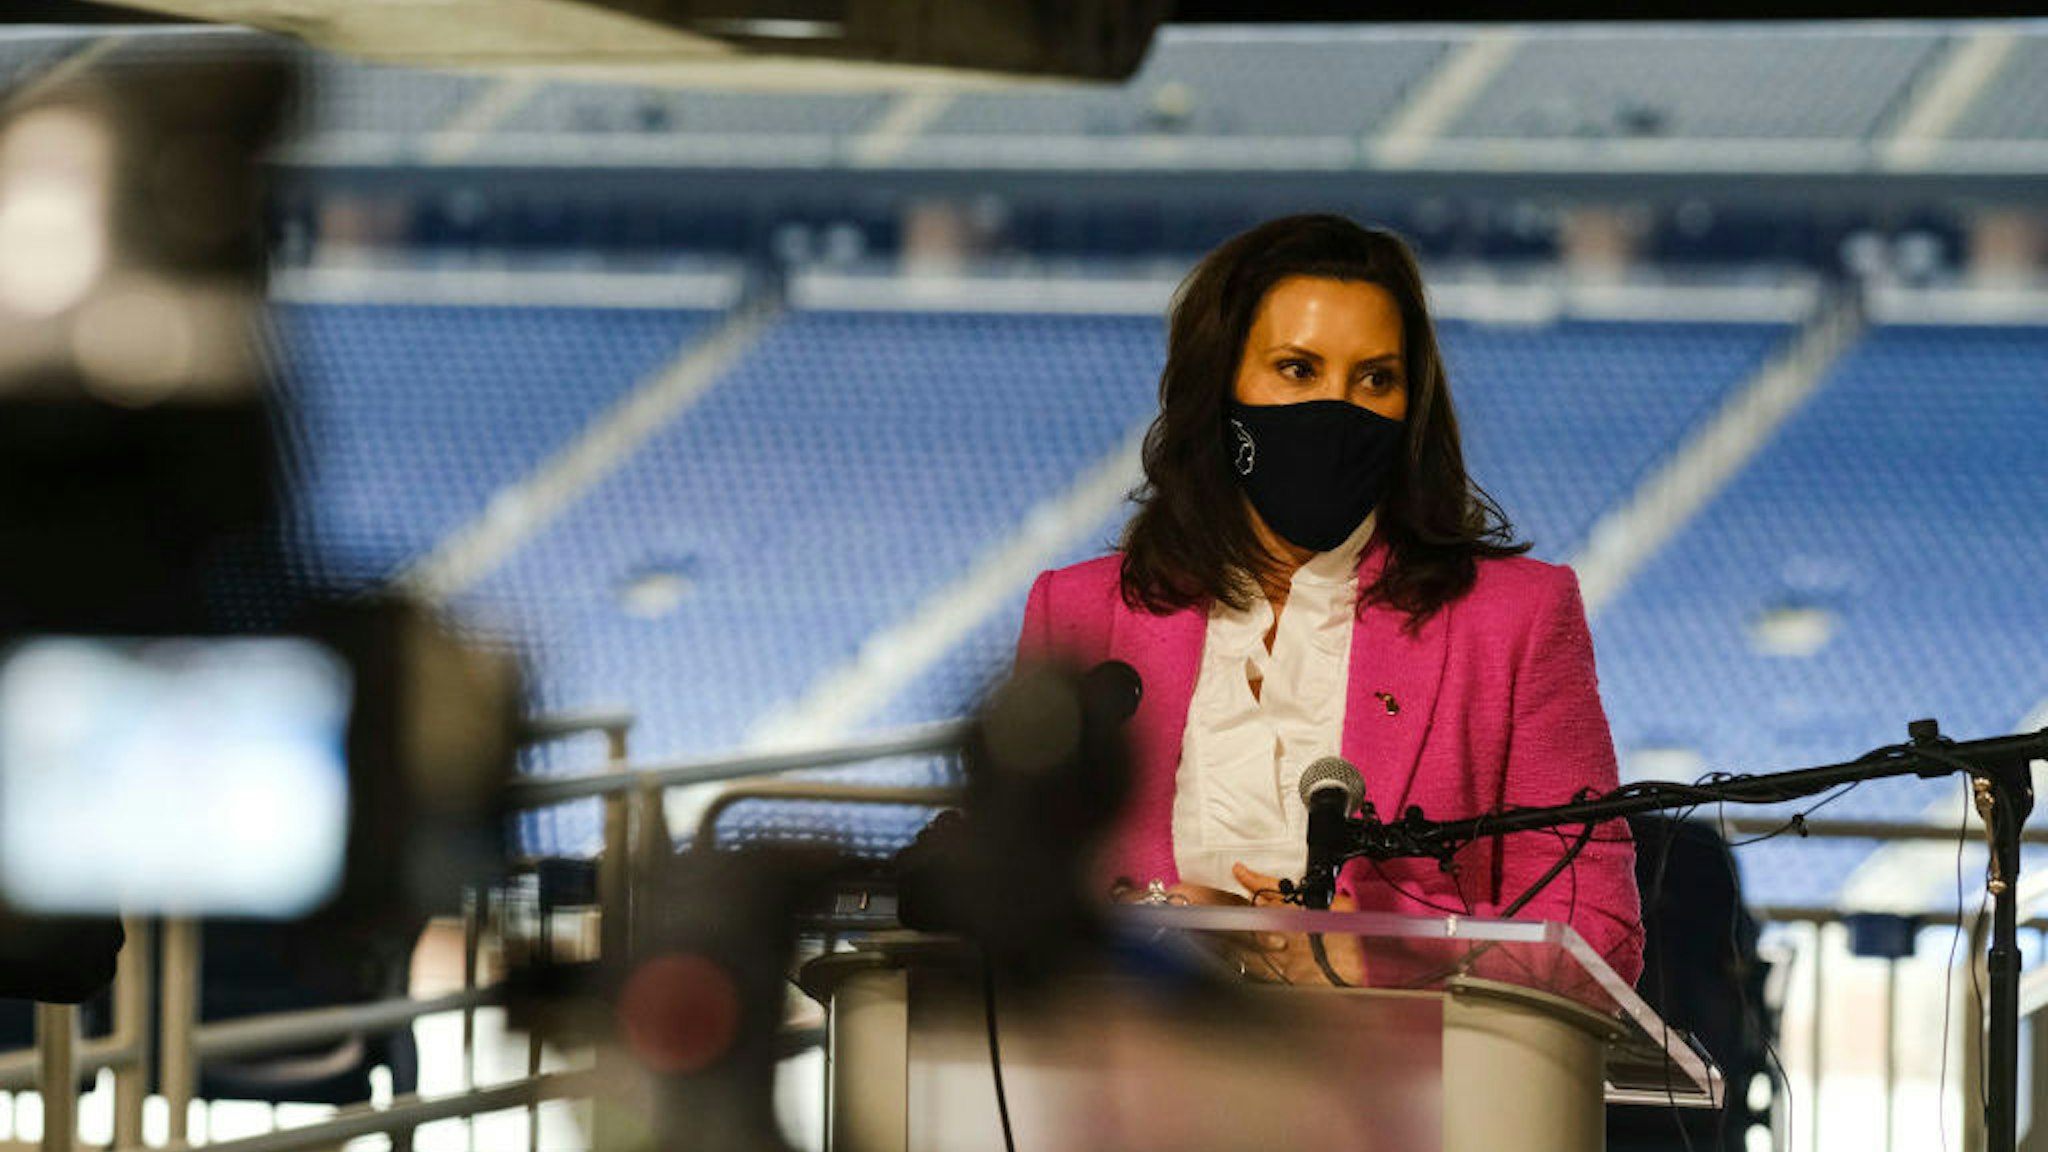 DETROIT, MI - APRIL 06: Michigan Governor Gretchen Whitmer speaks to members of the press about the rising numbers of Covid-19 cases in Michigan and the vaccine availability before receiving a dose of the Pfizer Covid vaccine at Ford Field on April 6, 2021 in Detroit, Michigan. As the US reaches a milestone in vaccinations, a surge of new Covid-19 cases has swept through the US with Michigan seeing the highest numbers of new cases. (Photo by Matthew Hatcher/Getty Images)